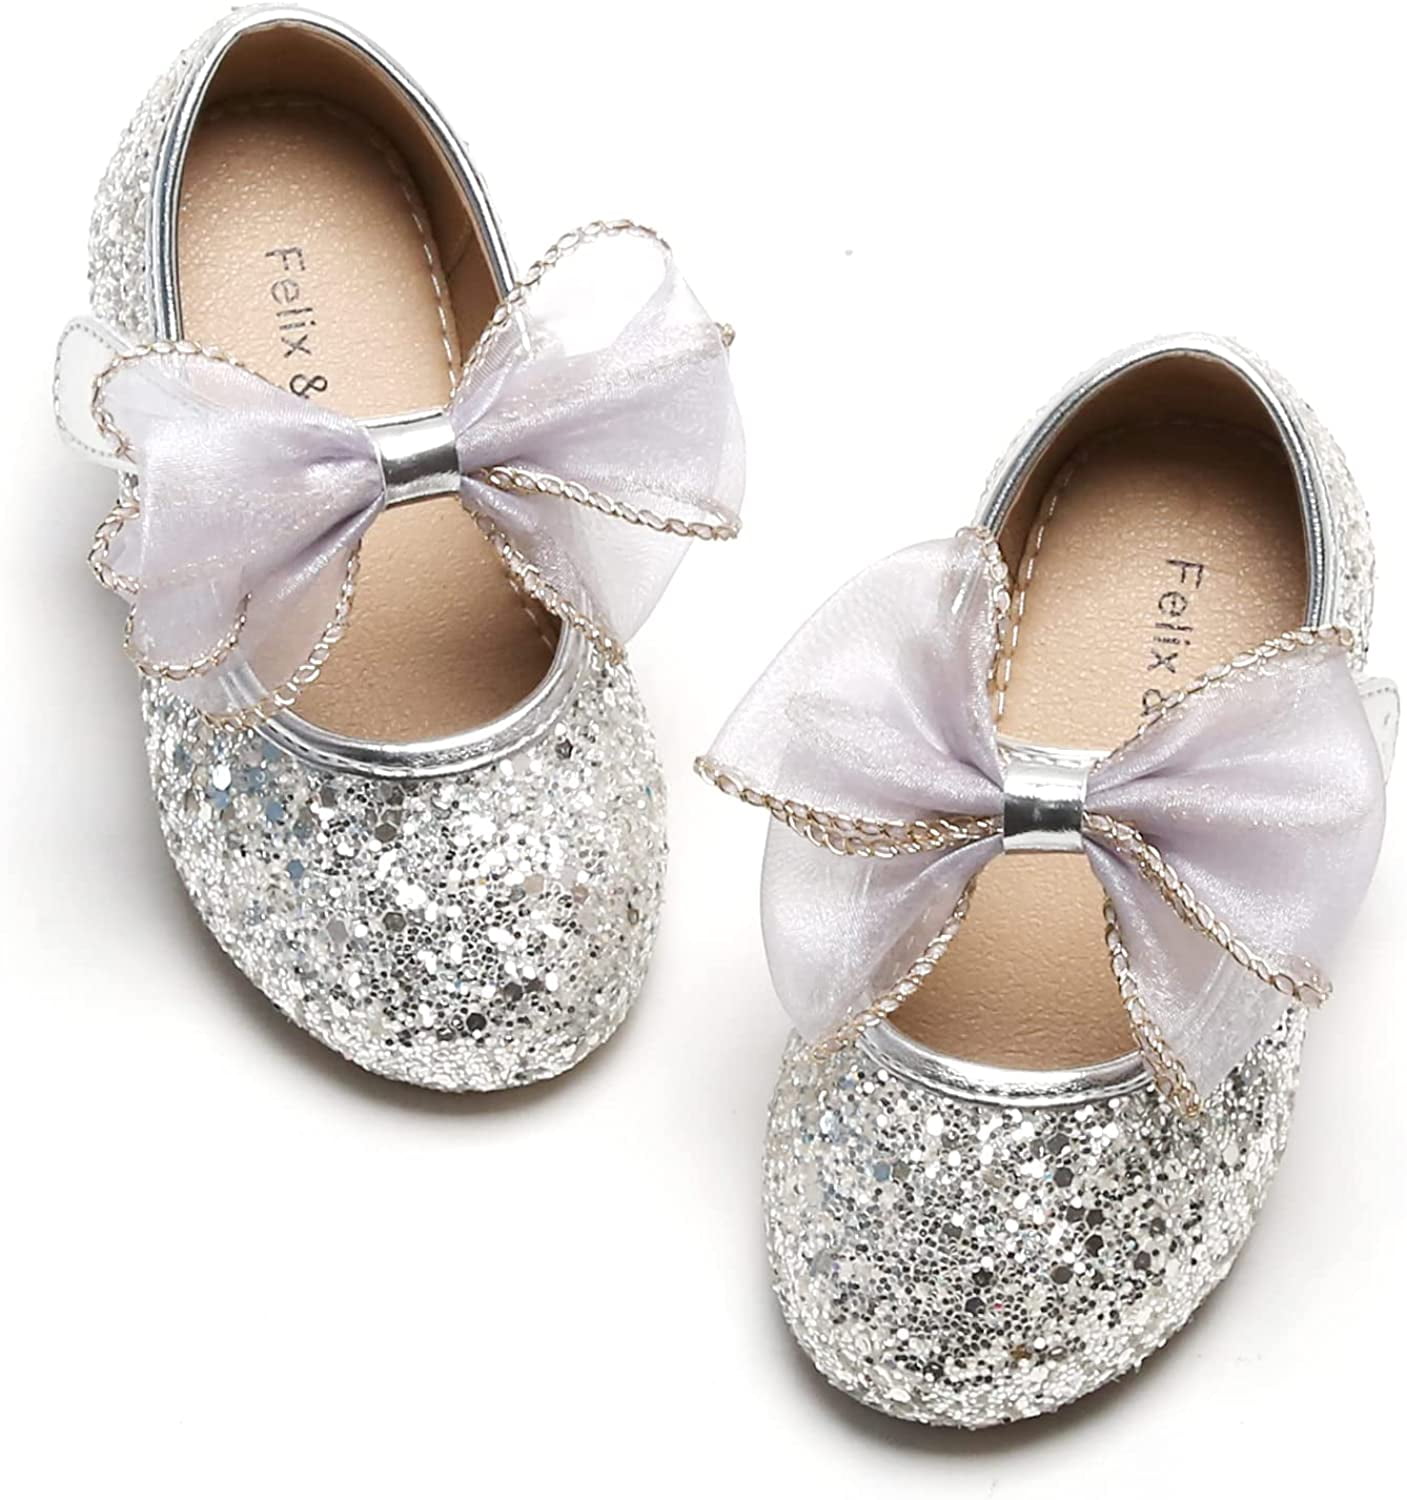 Toddler Little Girl Dress Shoes - Girl Mary Jane Flats Party School ...